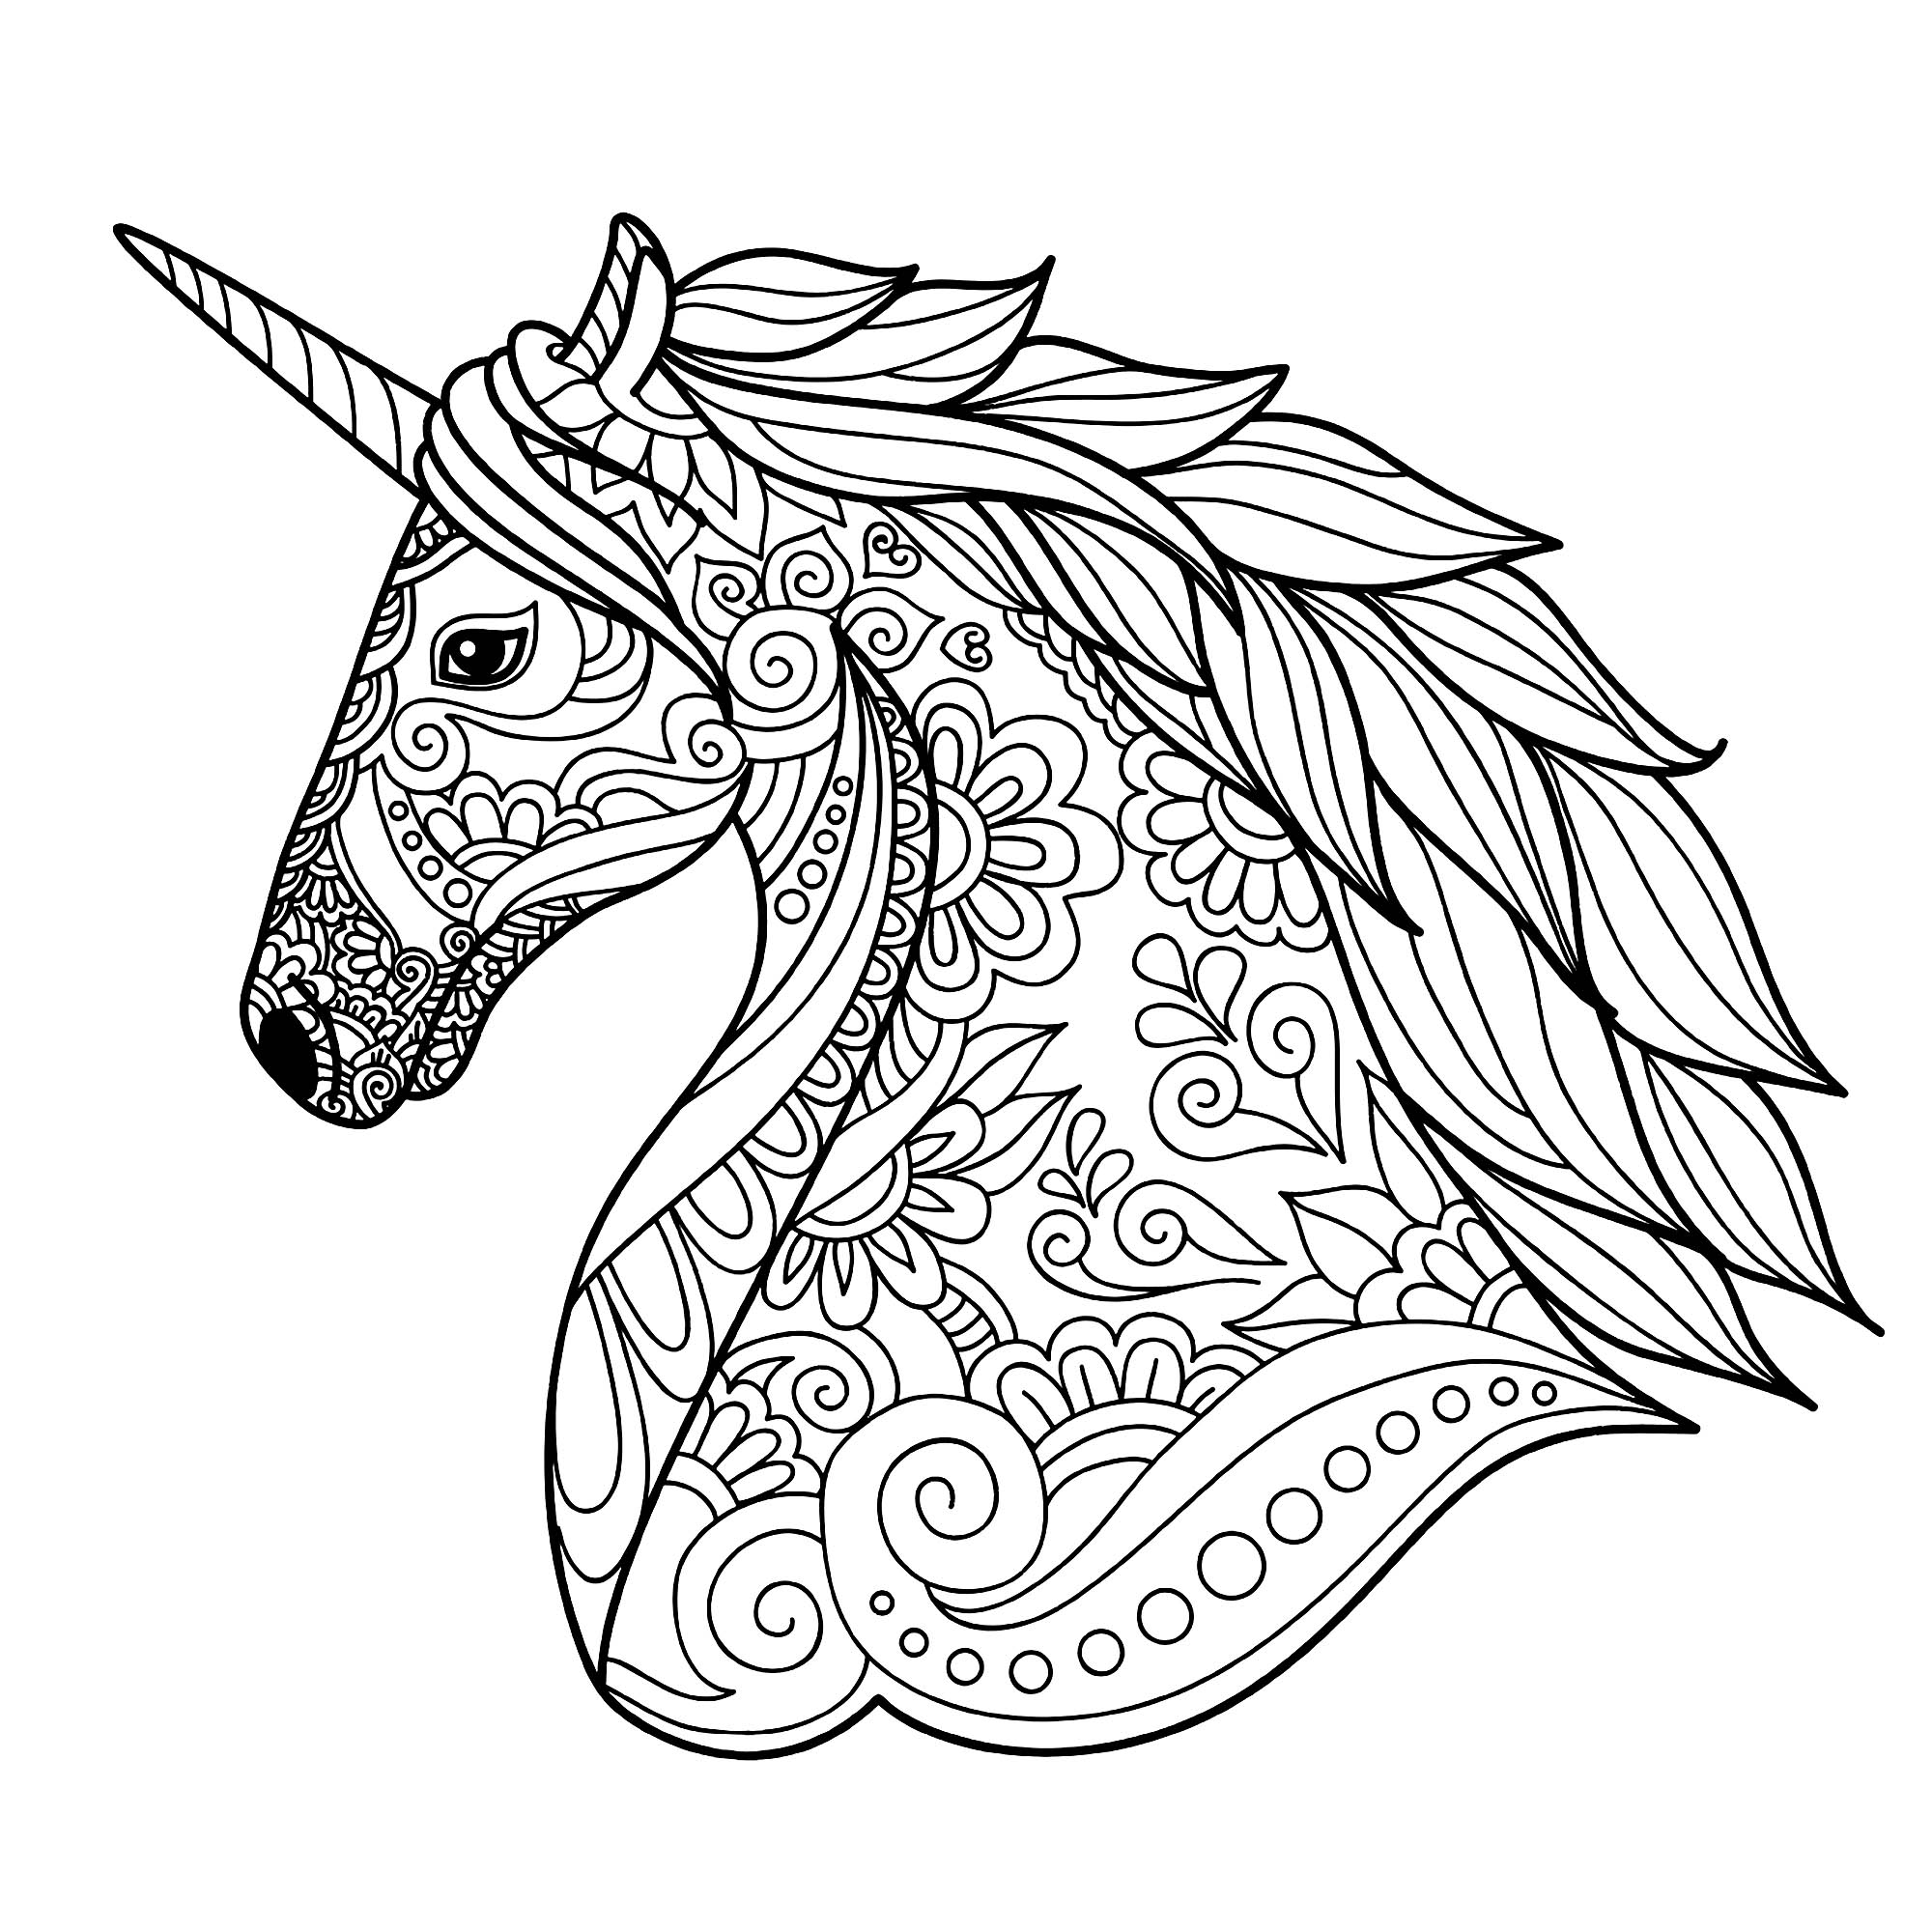  Unicorn  head  simple Unicorns  Adult Coloring  Pages 